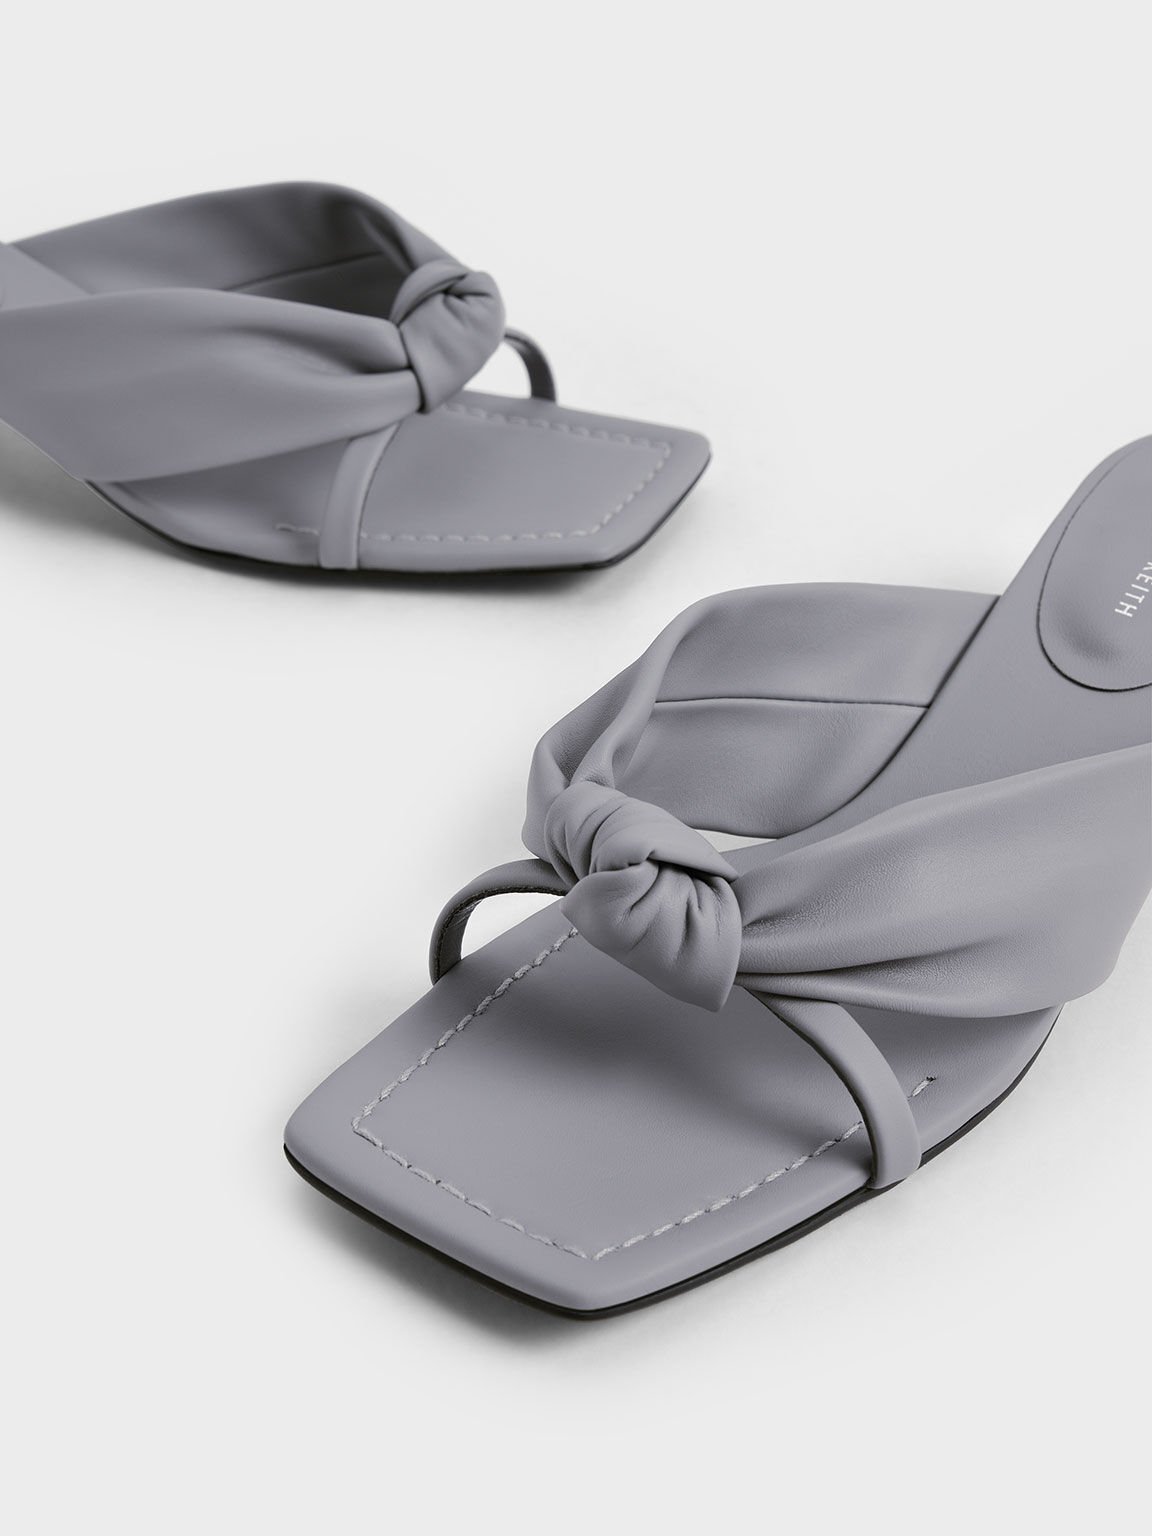 Sandal Mules Square Toe Knotted, Grey, hi-res